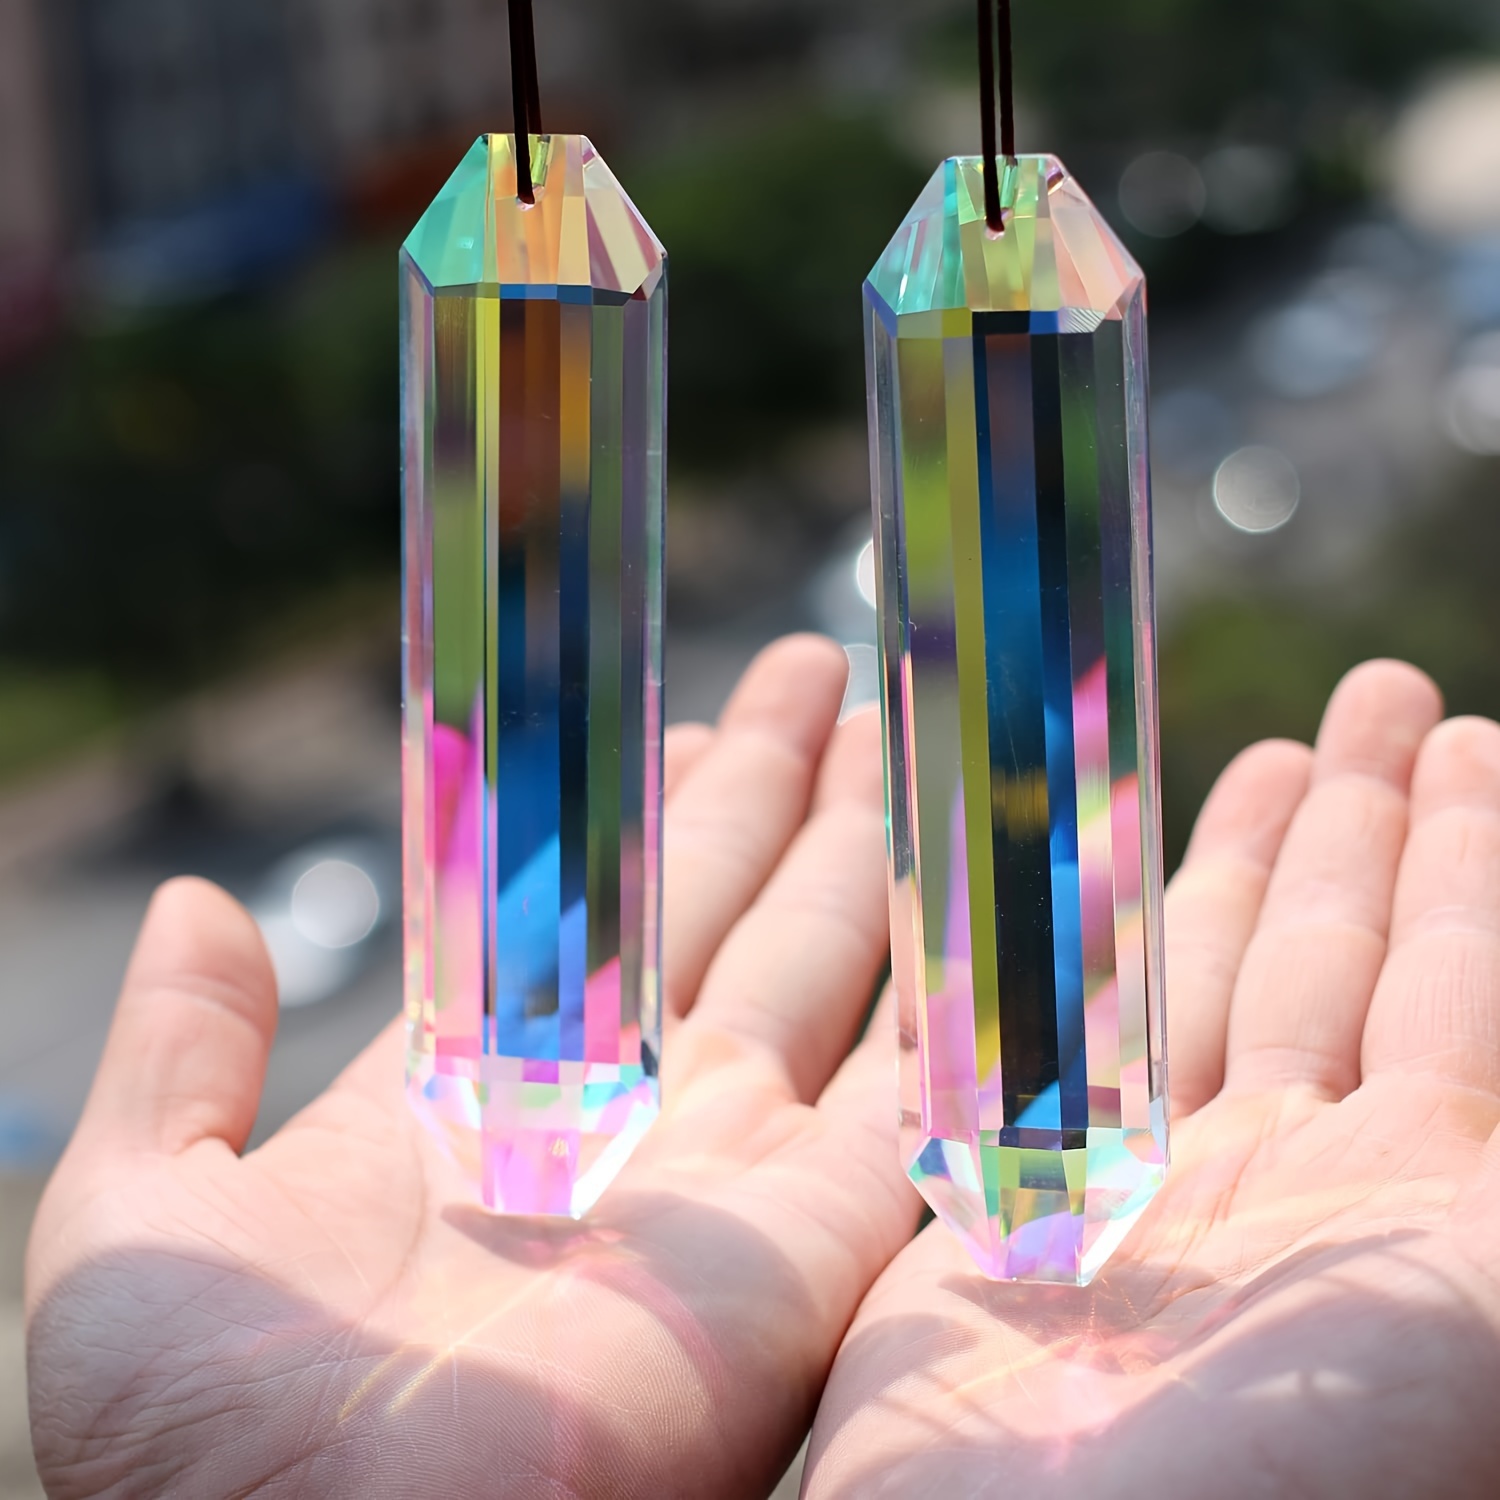 

2pcs Large Glass Light Catching Prisms, Window Hanging Suncatchers With Glass Prism Bars, Rainbow Maker For Home, Balcony, Kitchen, Garden Decors, Transparent Striped Rods